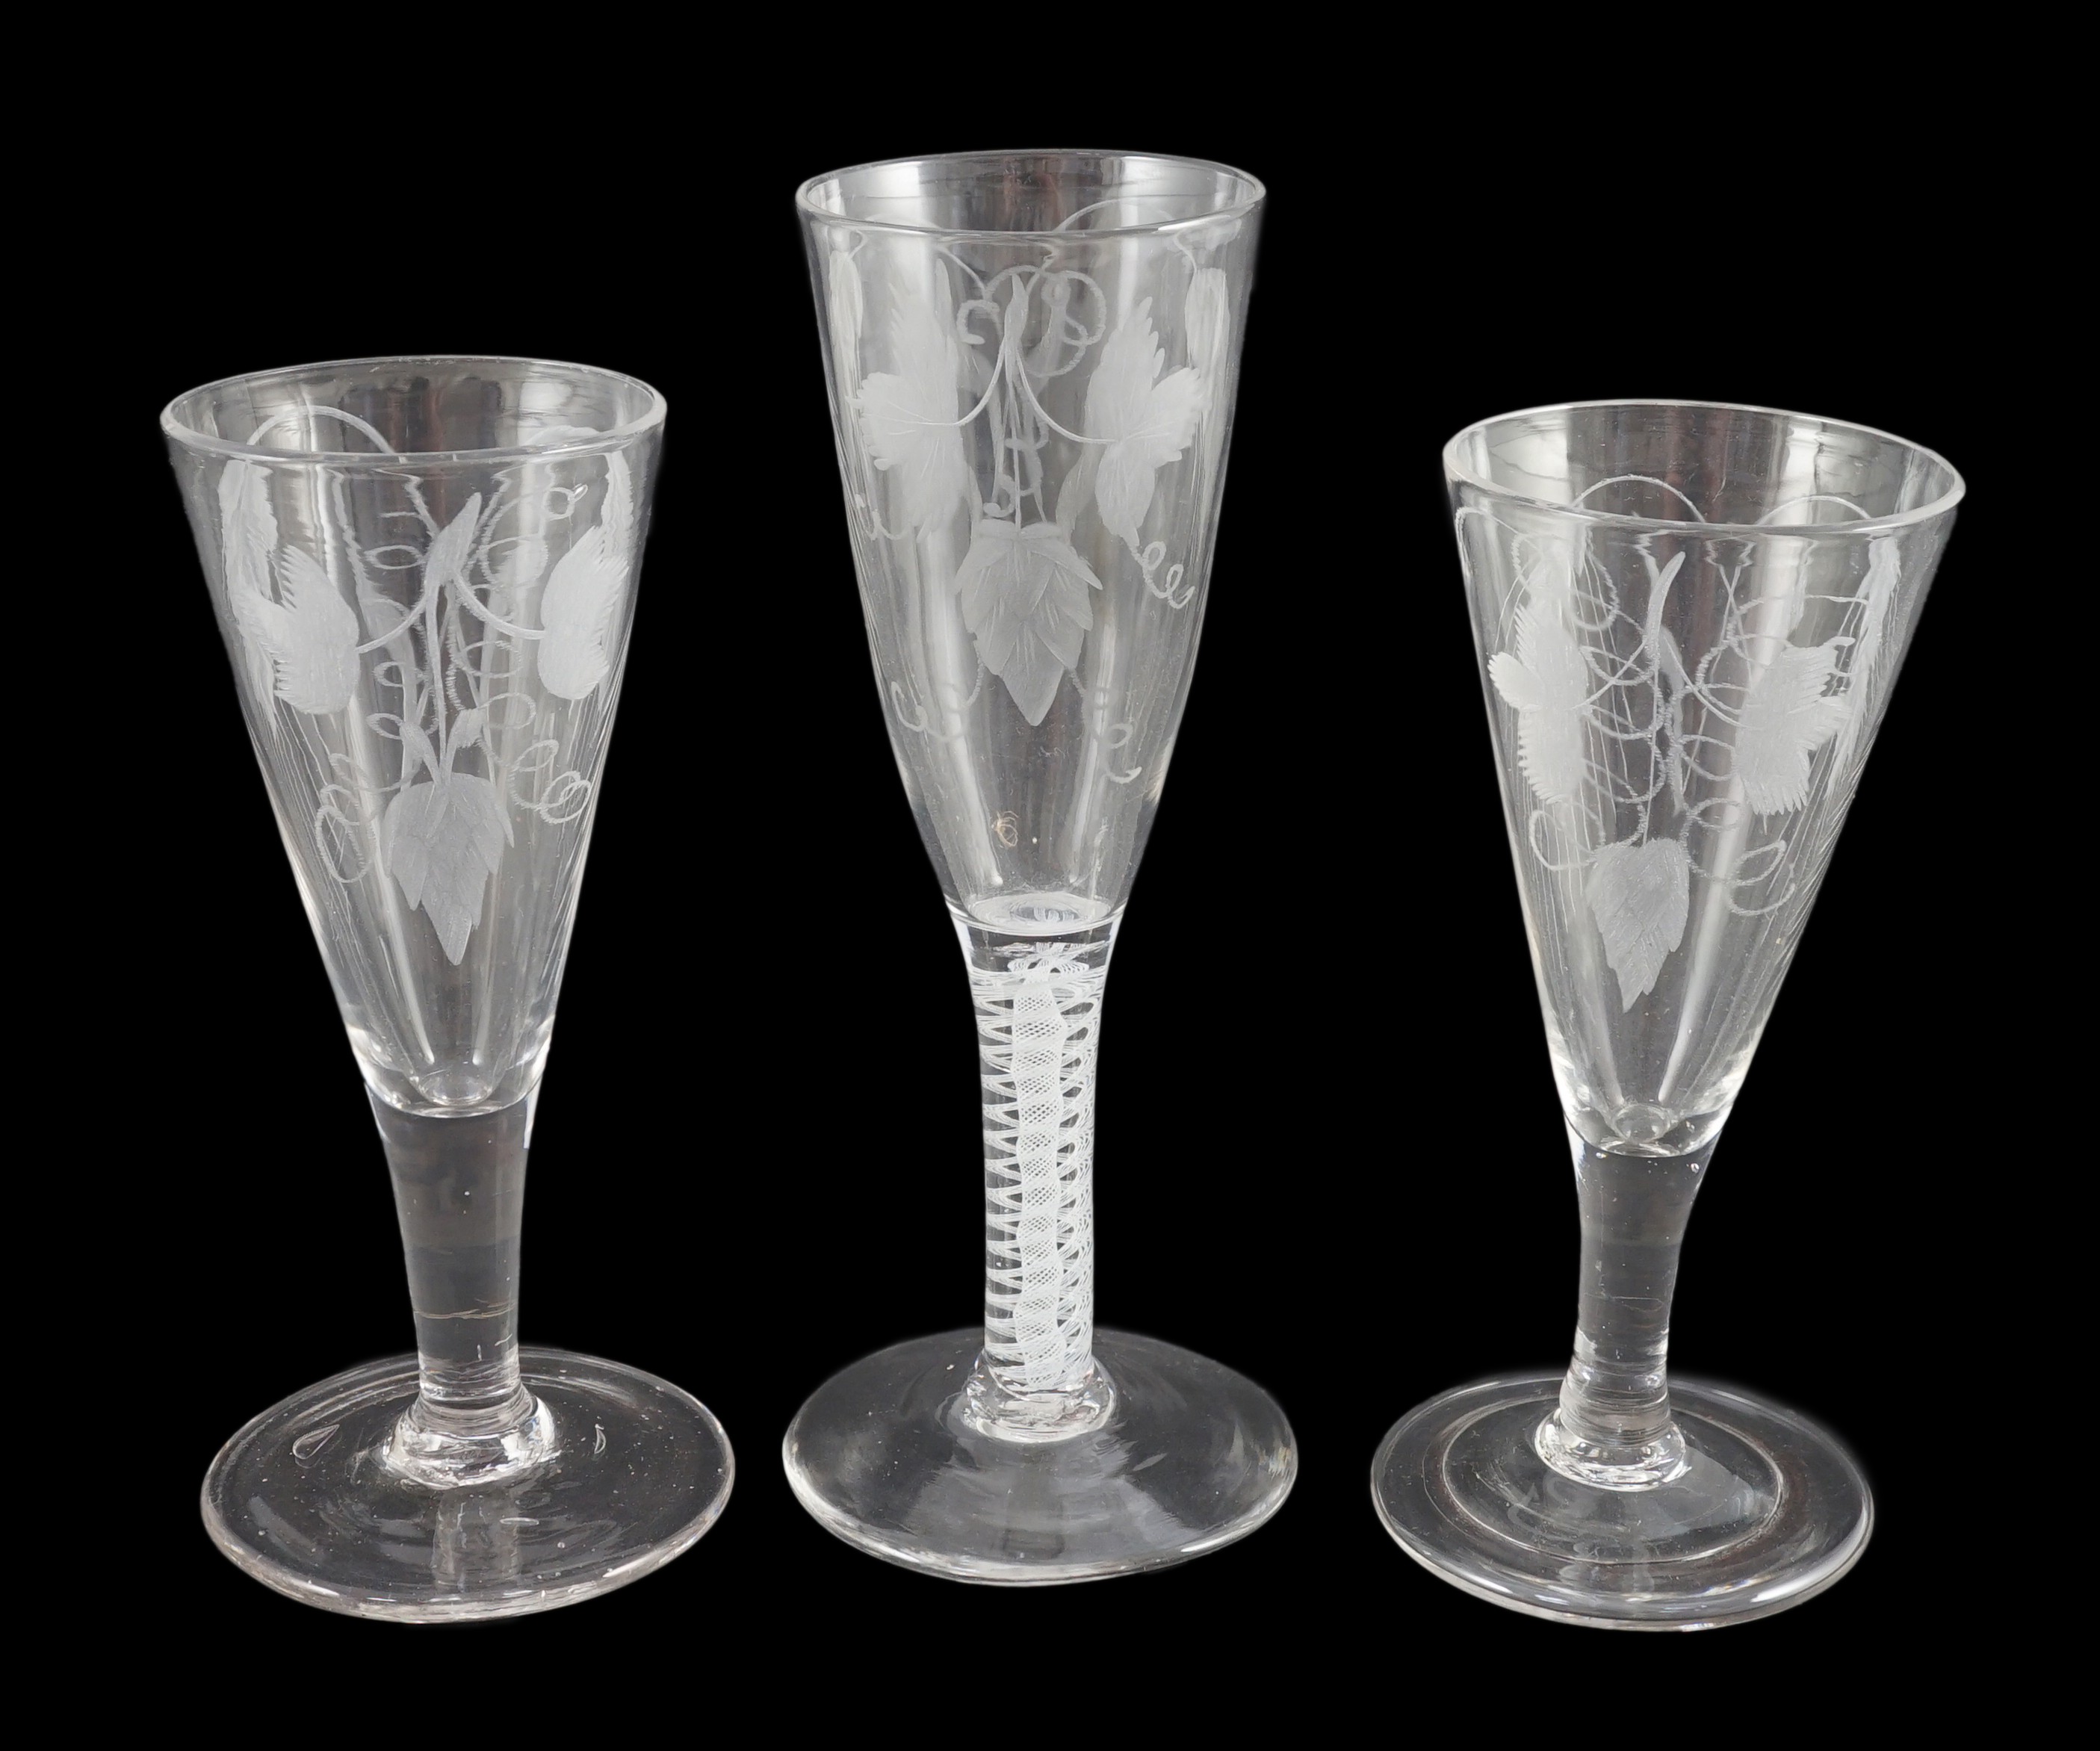 Three ‘hops and barley’ wheel engraved glass ale flutes, mid 18th century